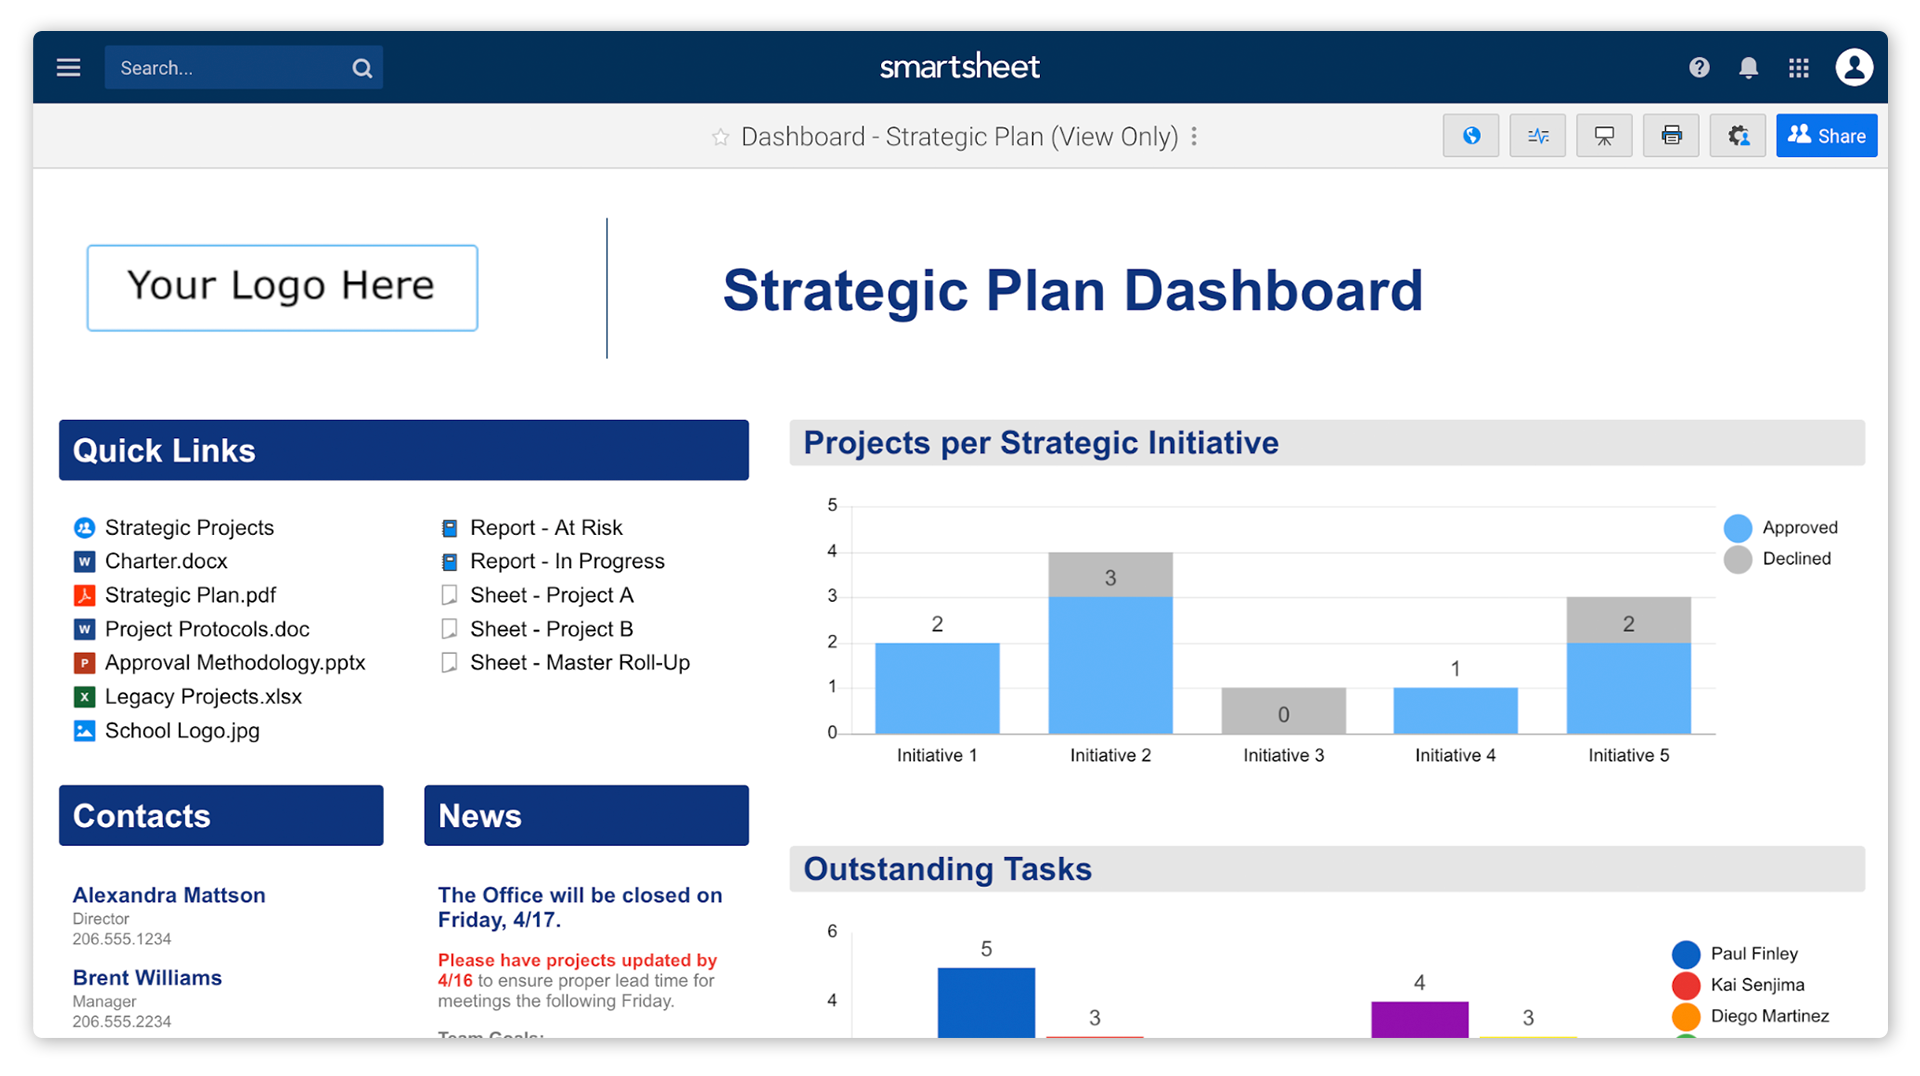 A Smartsheet dashboard illustrates an example of a strategic plan dashboard, including quick links, contact list, news section, and bar charts showing projects by initiative and outstanding tasks by owner